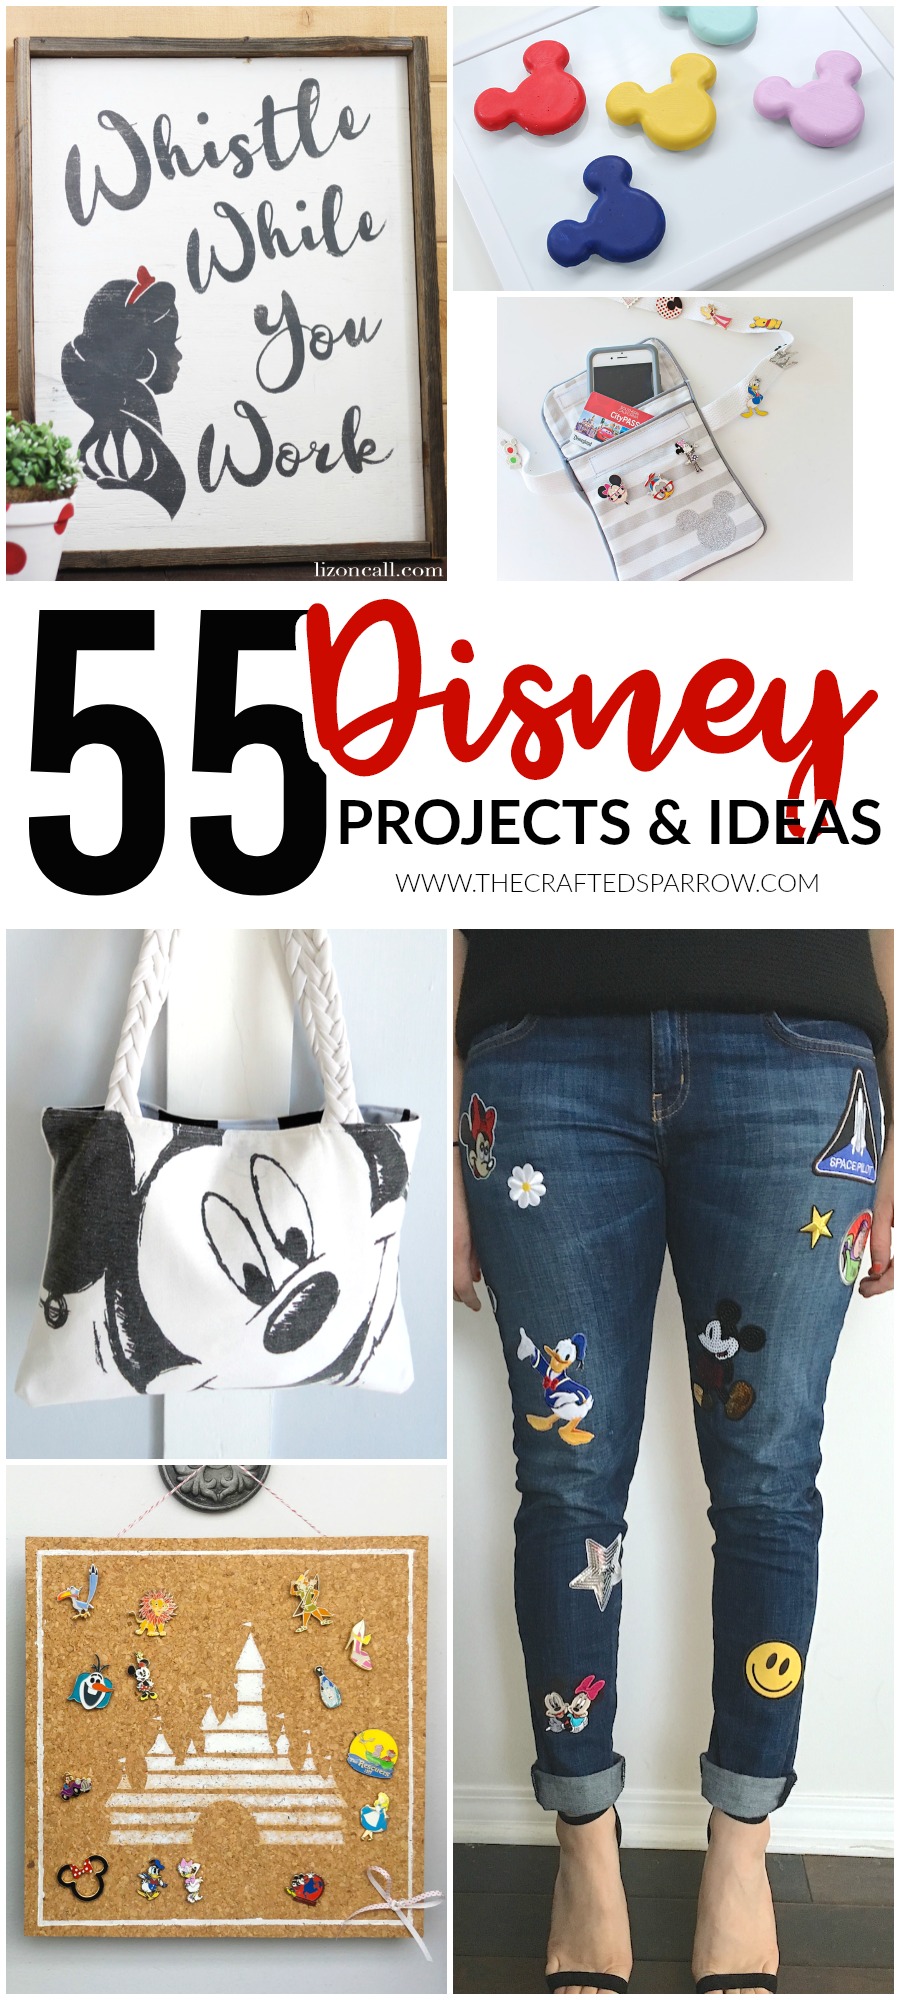 10 Unique Mickey Mouse Gifts For The Disney Lover #DisneySide - 4